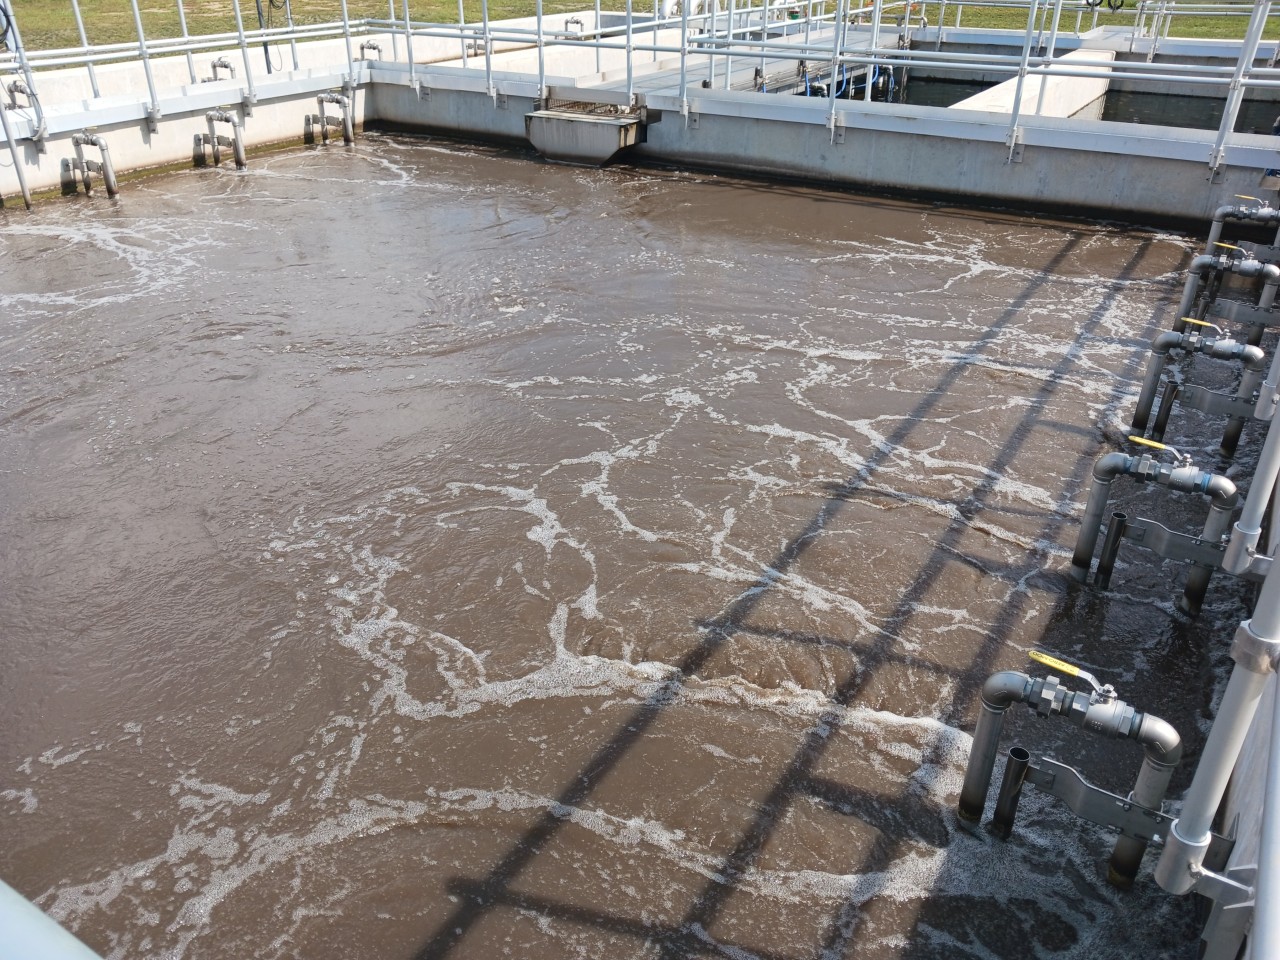 An aeration basin in wastewater treatment